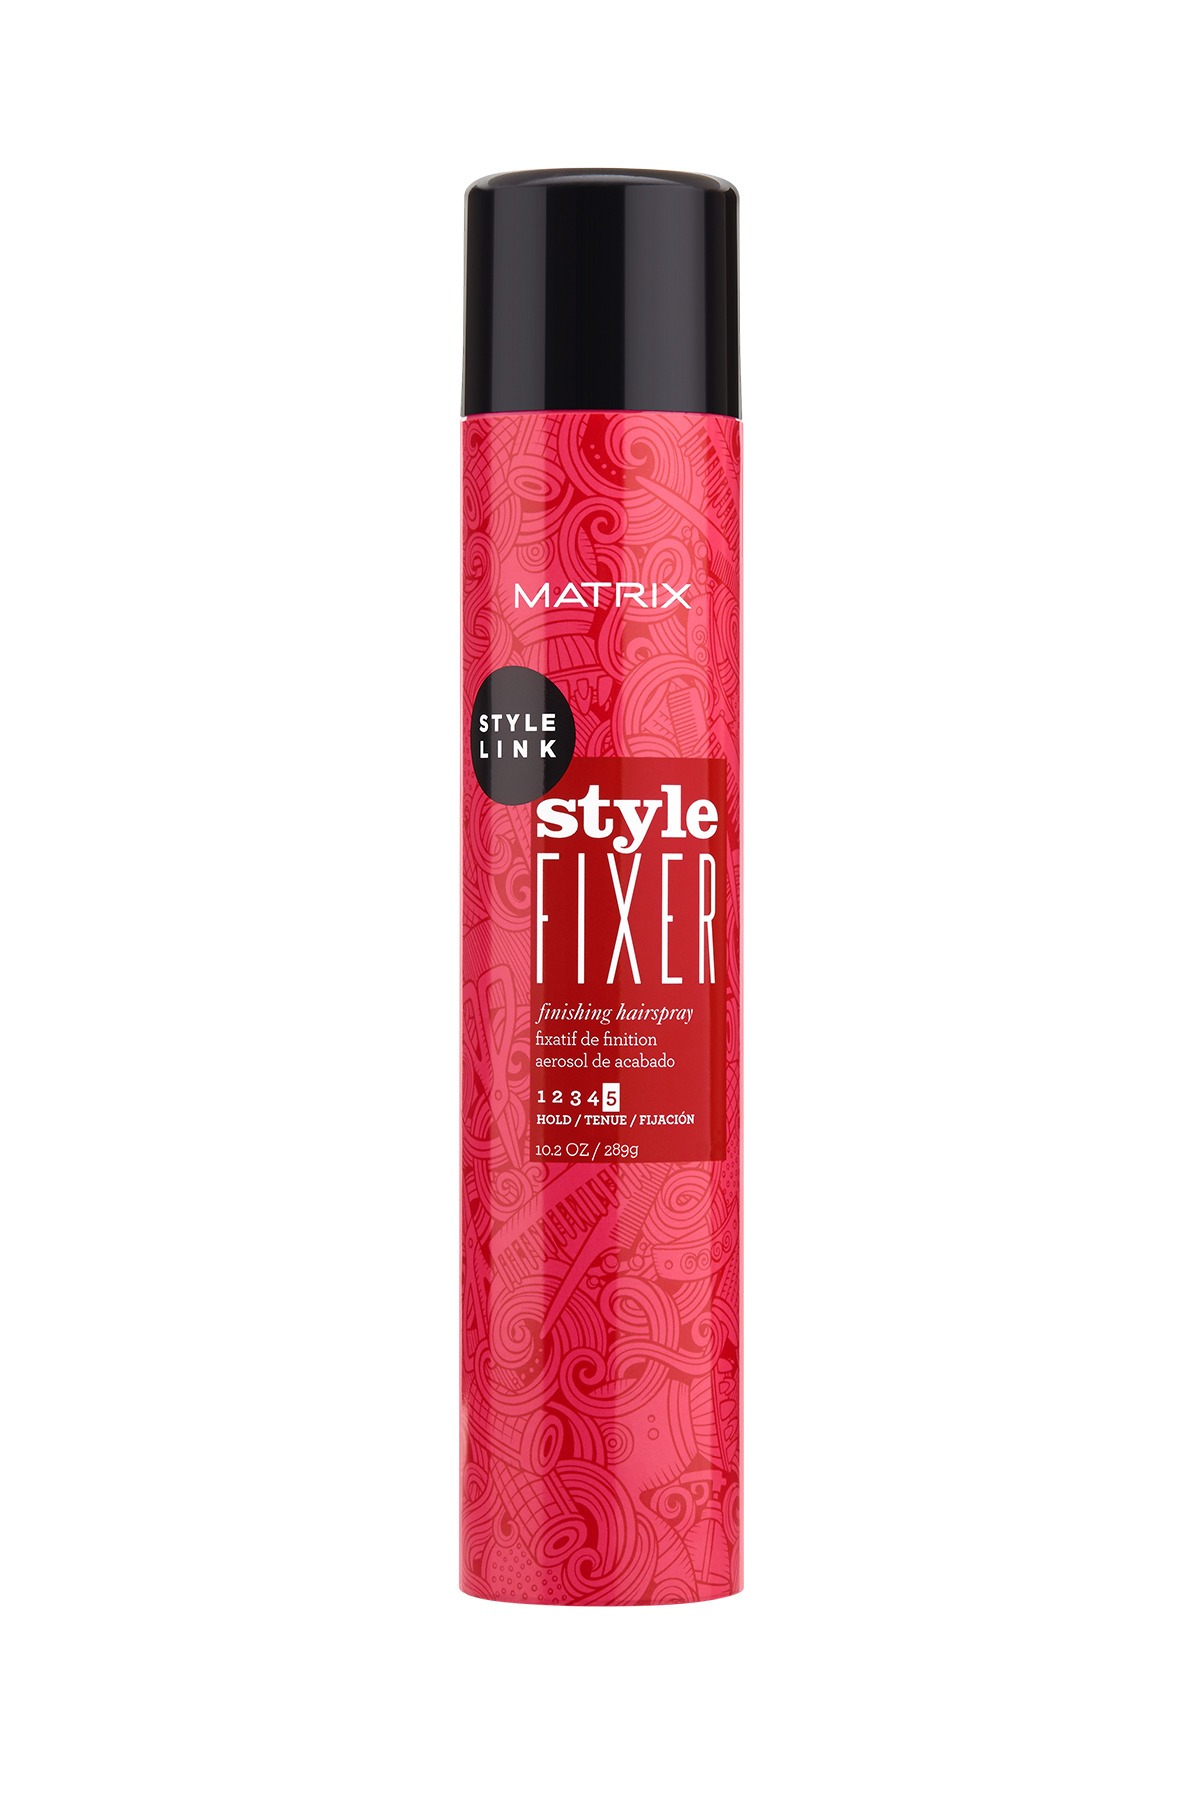 Style Link STYLE FIXER, Fixierspray, 400ml